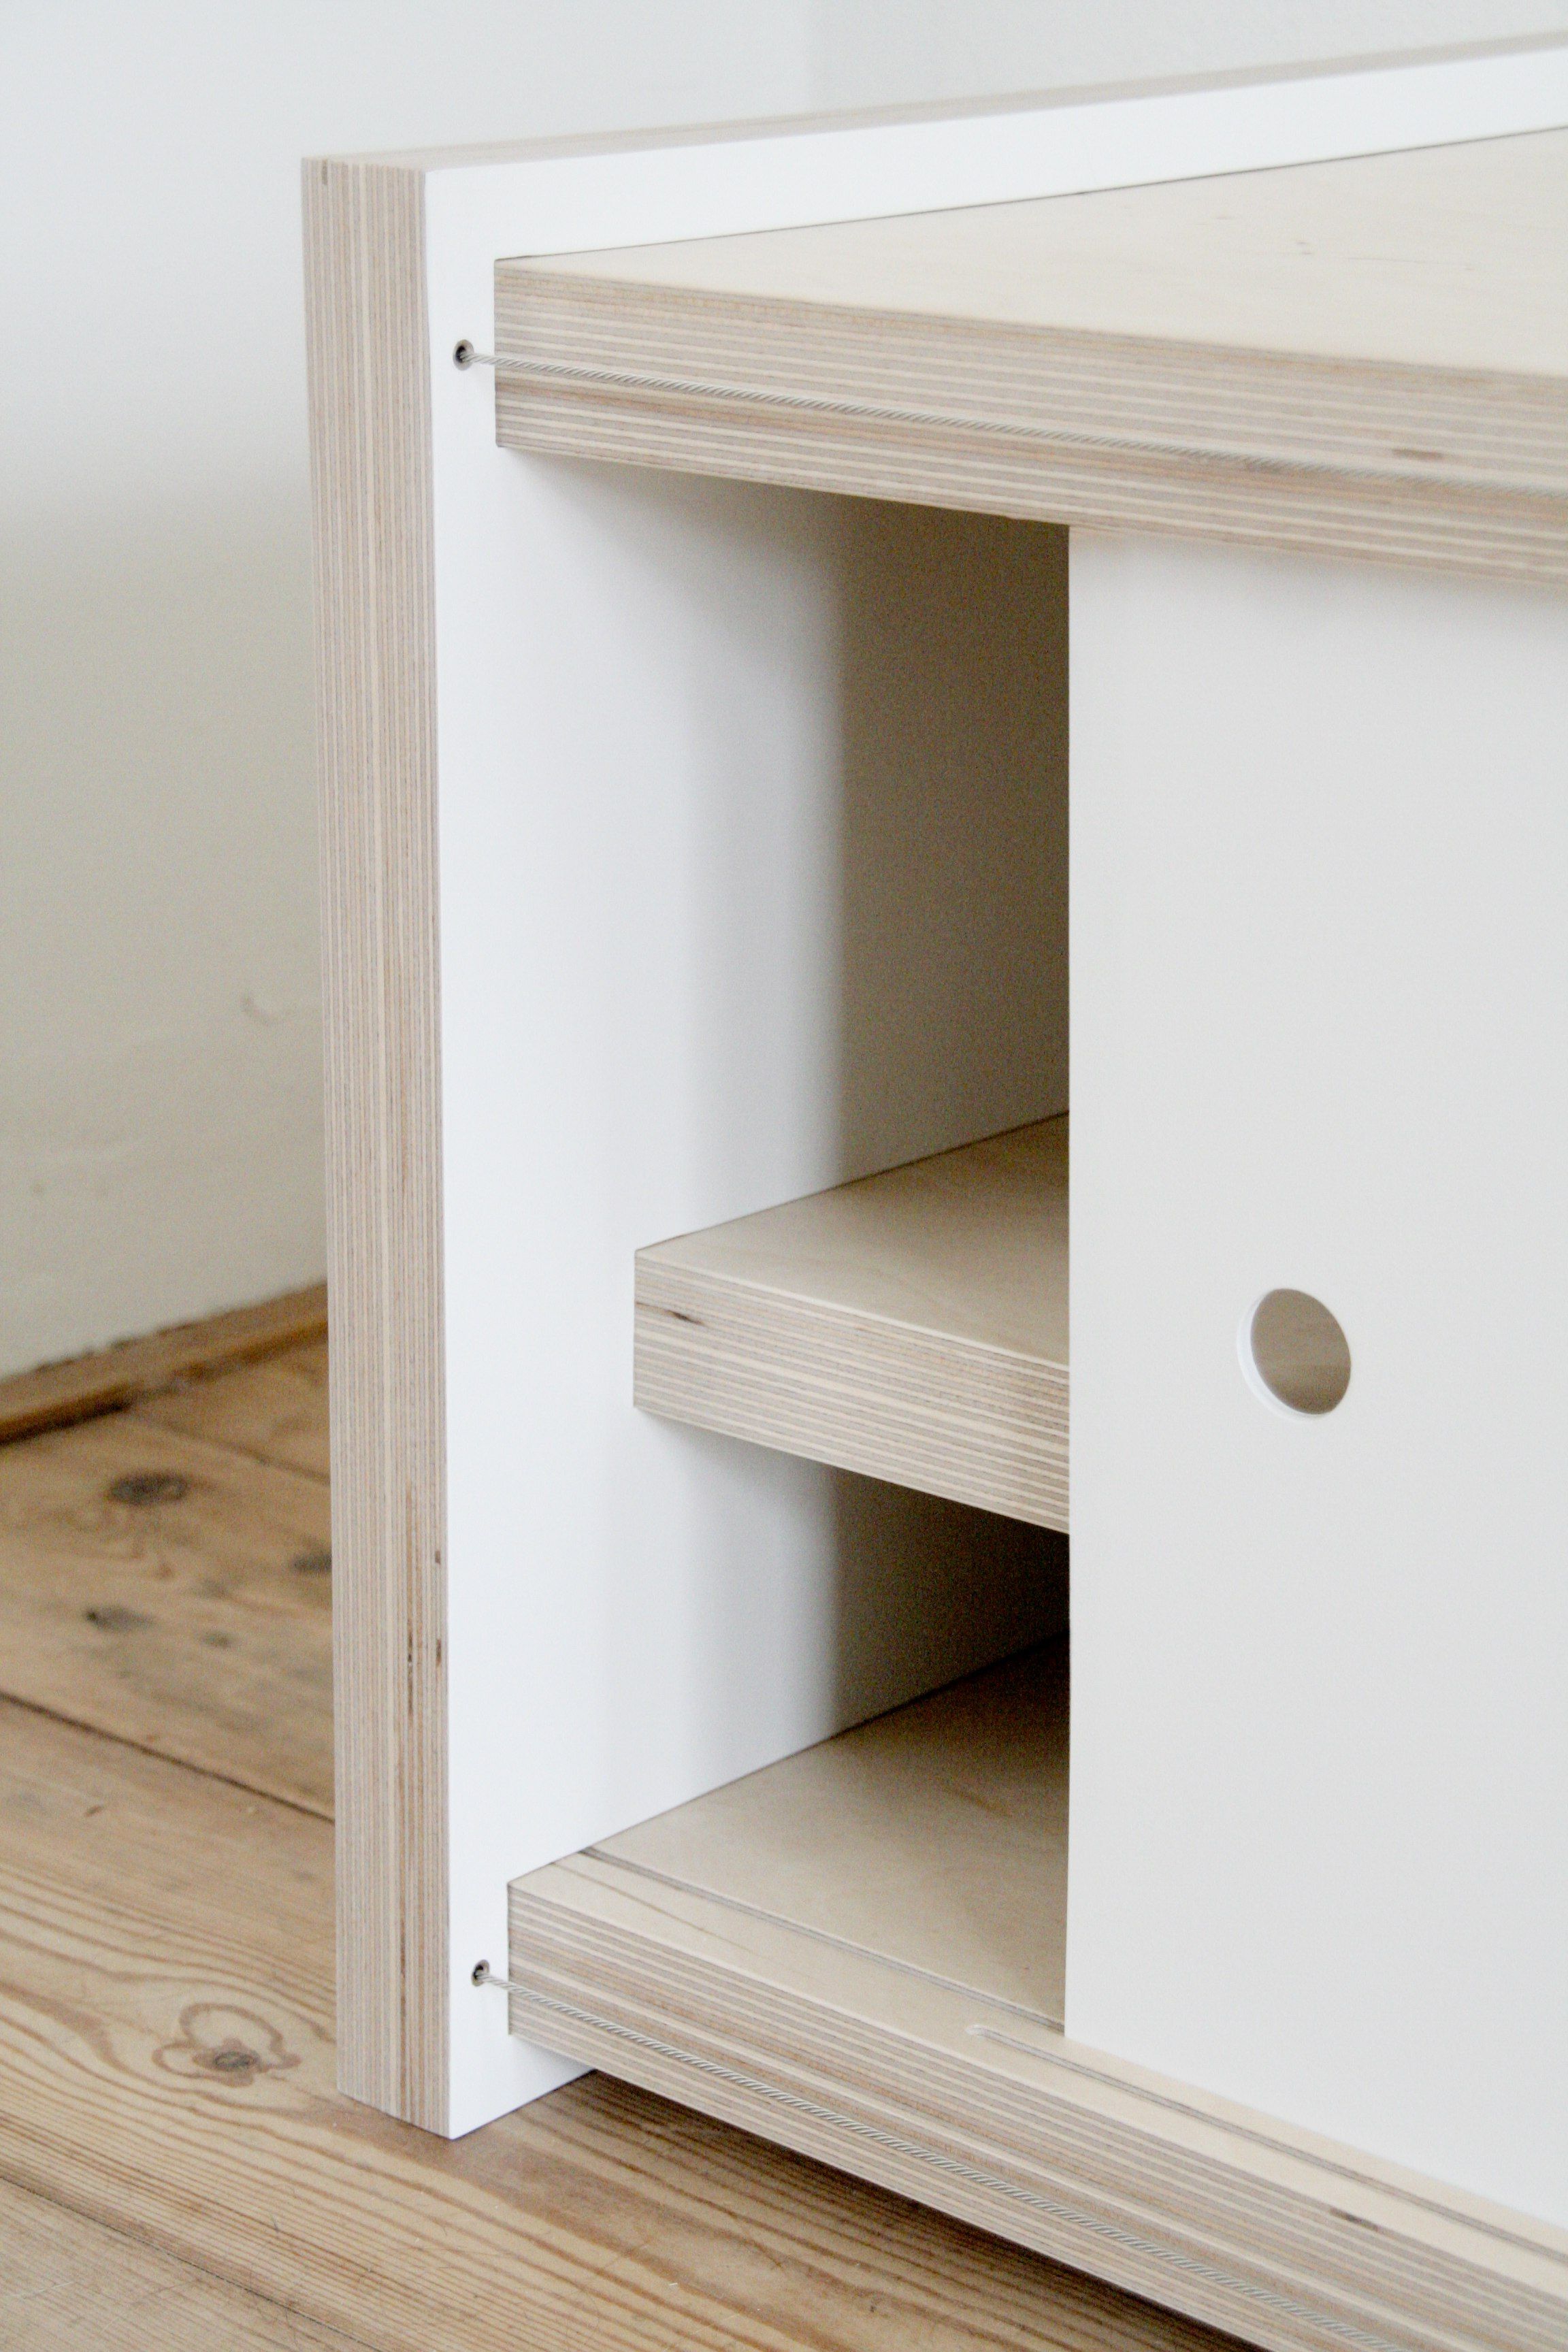 Popular Shop White Wooden Tv Cabinet On Crowdyhouse Inside Wooden Tv Cabinets (View 16 of 20)